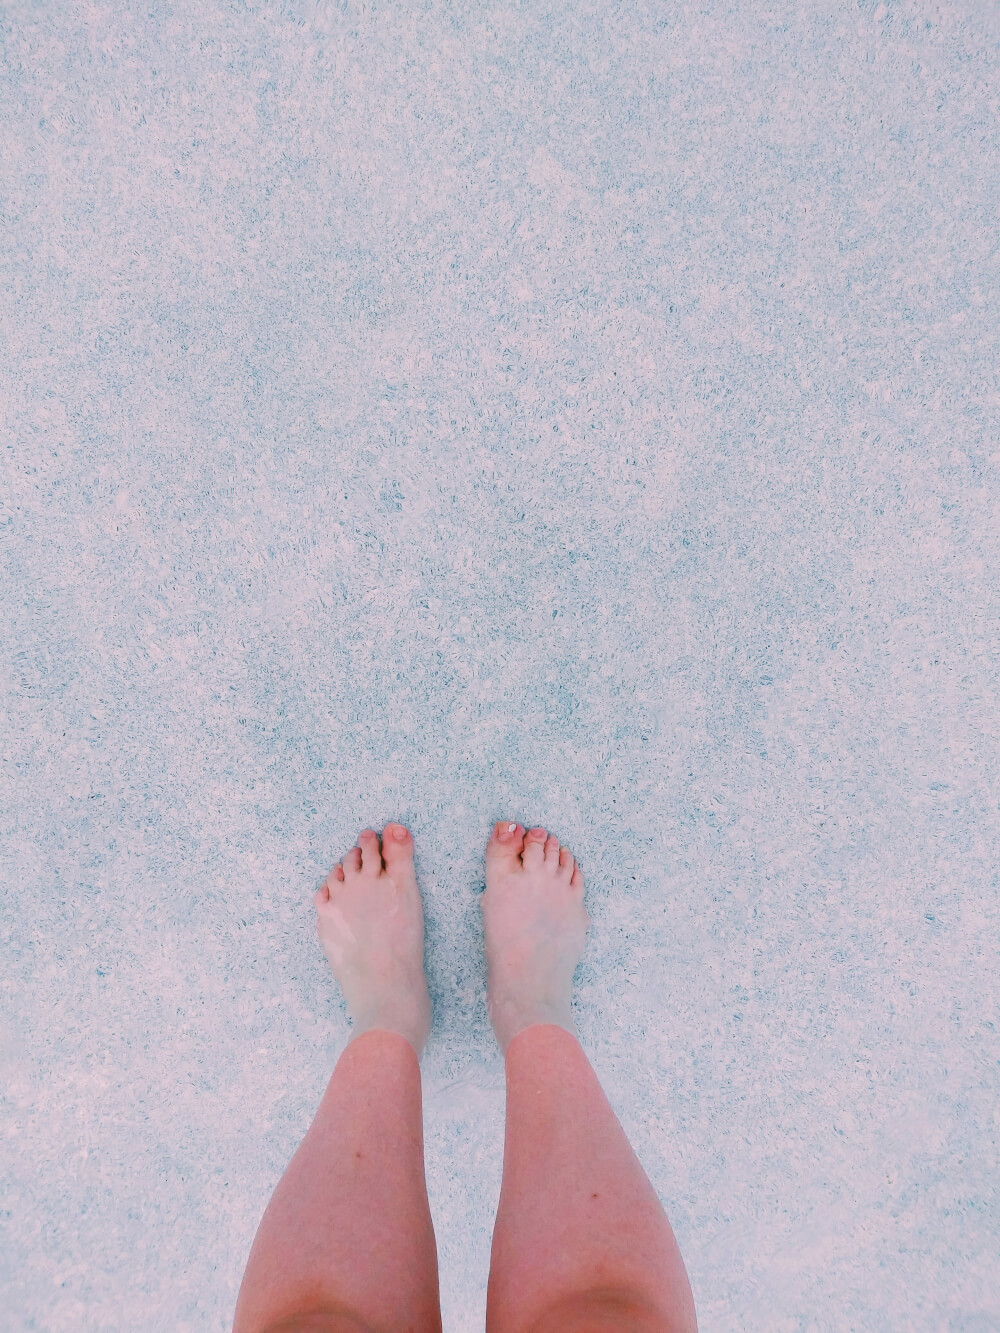 From where I stand in 4 inches' deep pool water; unpainted toenails